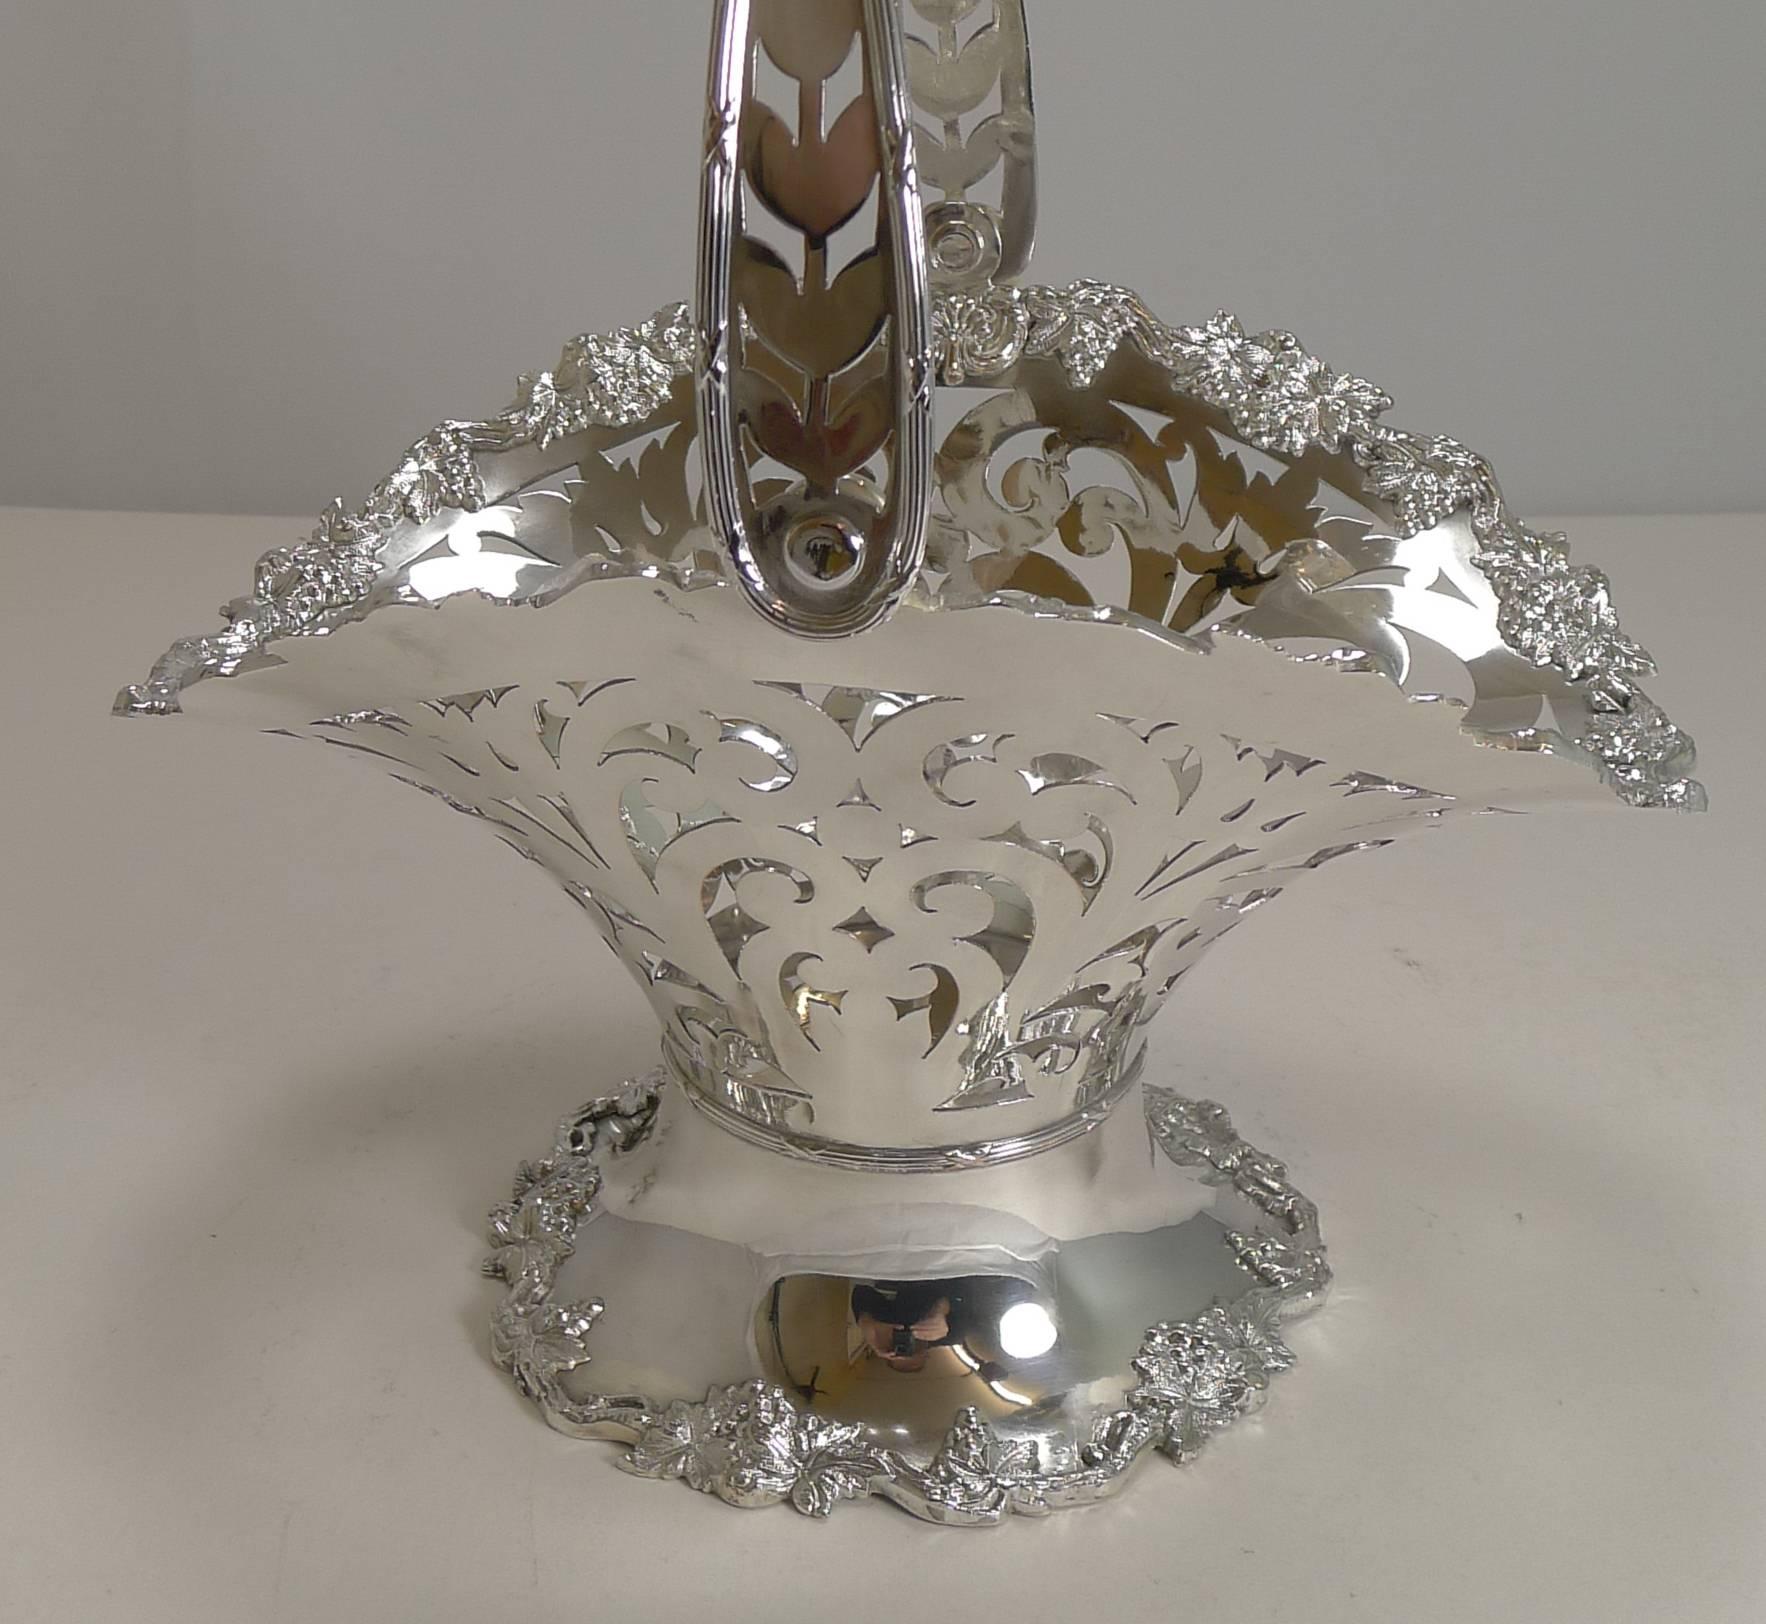 Edwardian Antique English Reticulated Silver Plate Fruit Basket, circa 1900